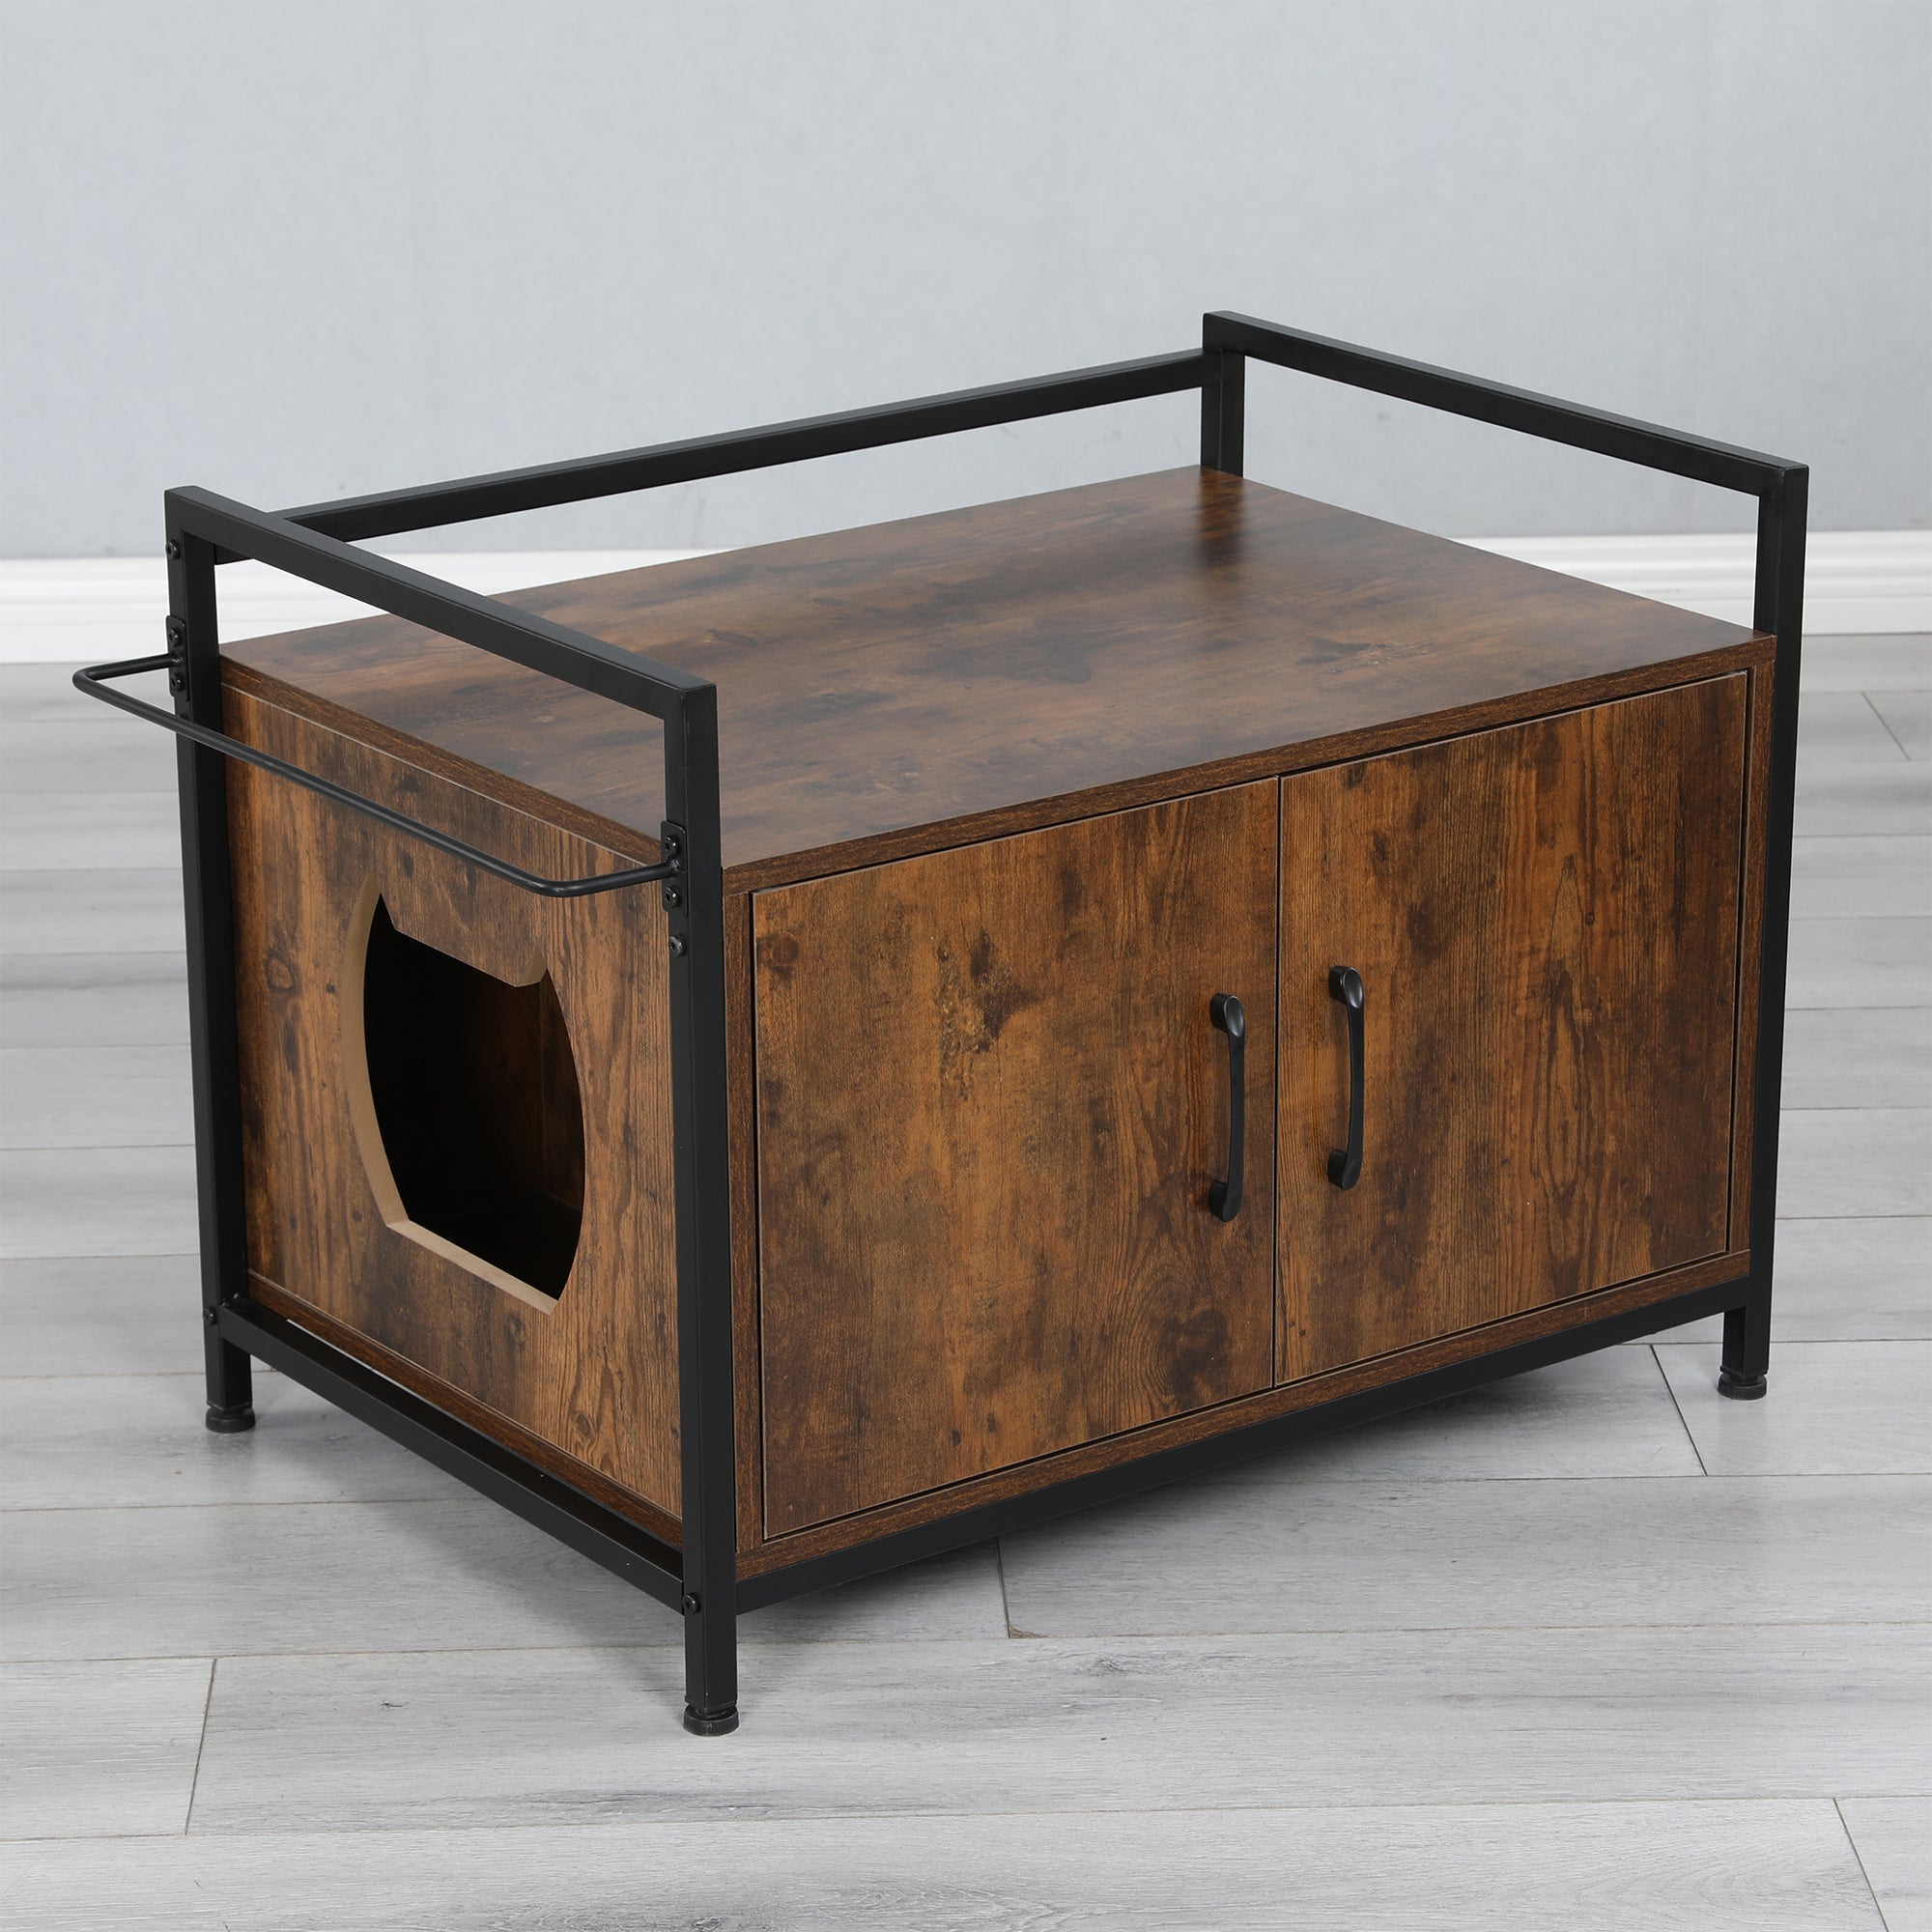 Litter Box Hidden, Pet Crate with Iron and Wood Sturdy Structure, Cat Dog House Nightstand